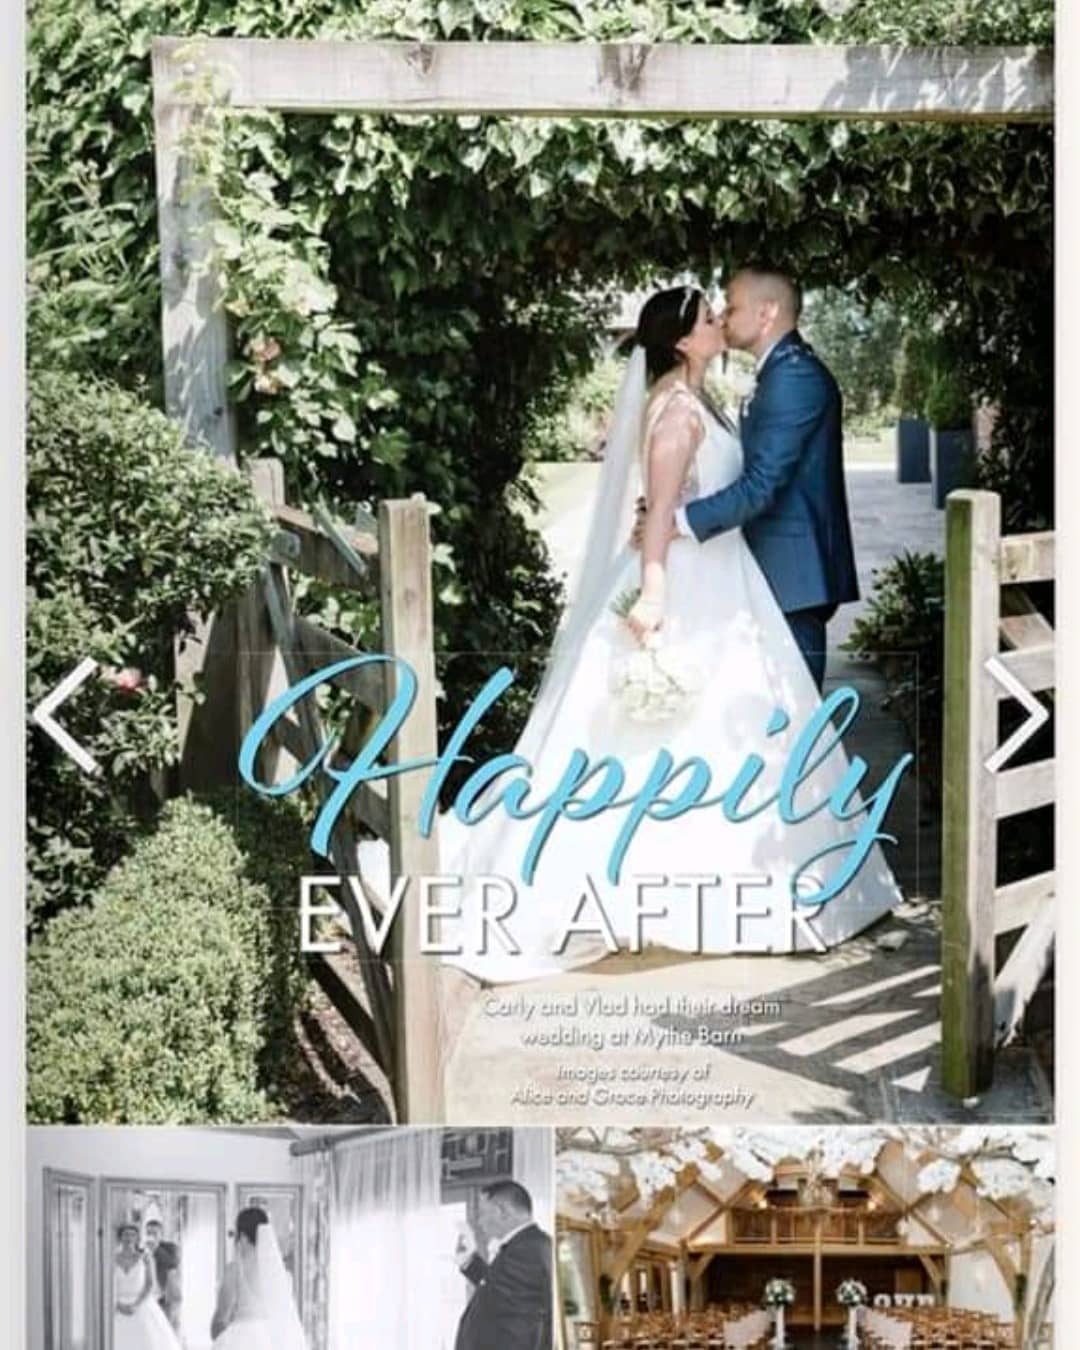 How fabulous!! Vlad & Carly's Wedding @mythebarnweddings has been featured in Your West Midlands Wedding Oct/Nov issue. 
It was my pleasure to not only design the flowers for this Beautiful Wedding but also be a guest